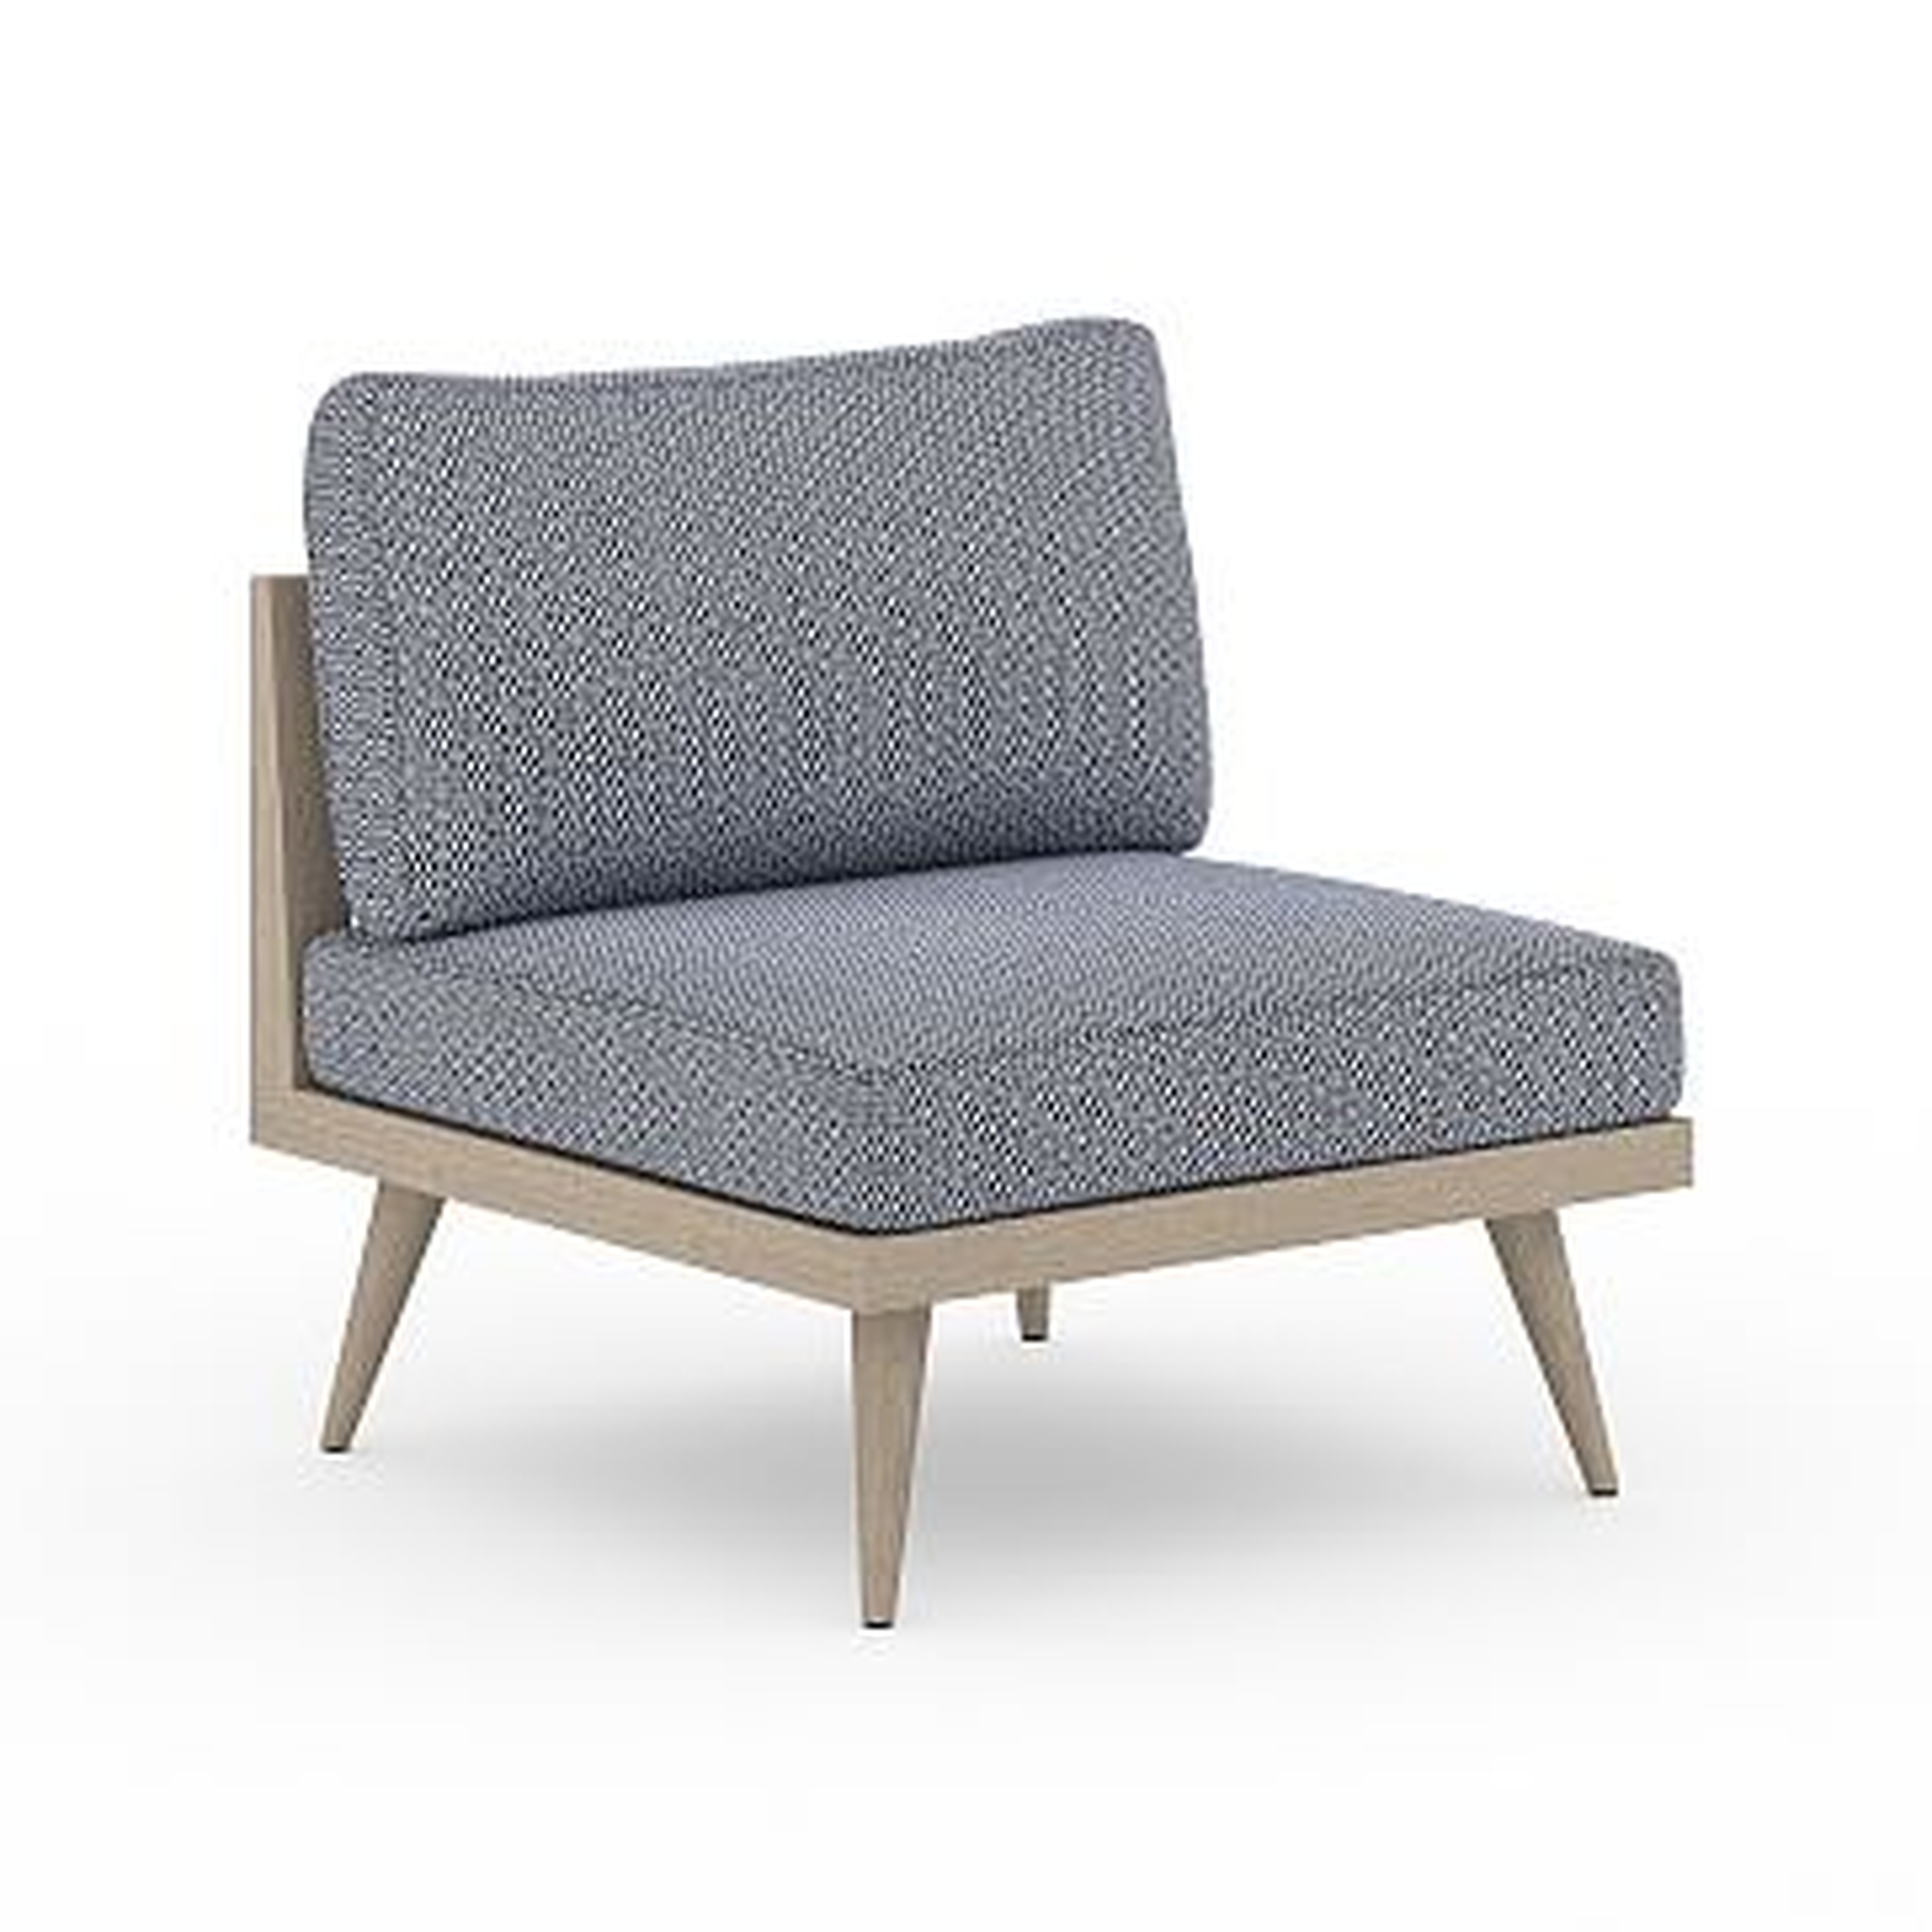 Strand Modern Outdoor Lounge Chair, Faye Navy - West Elm